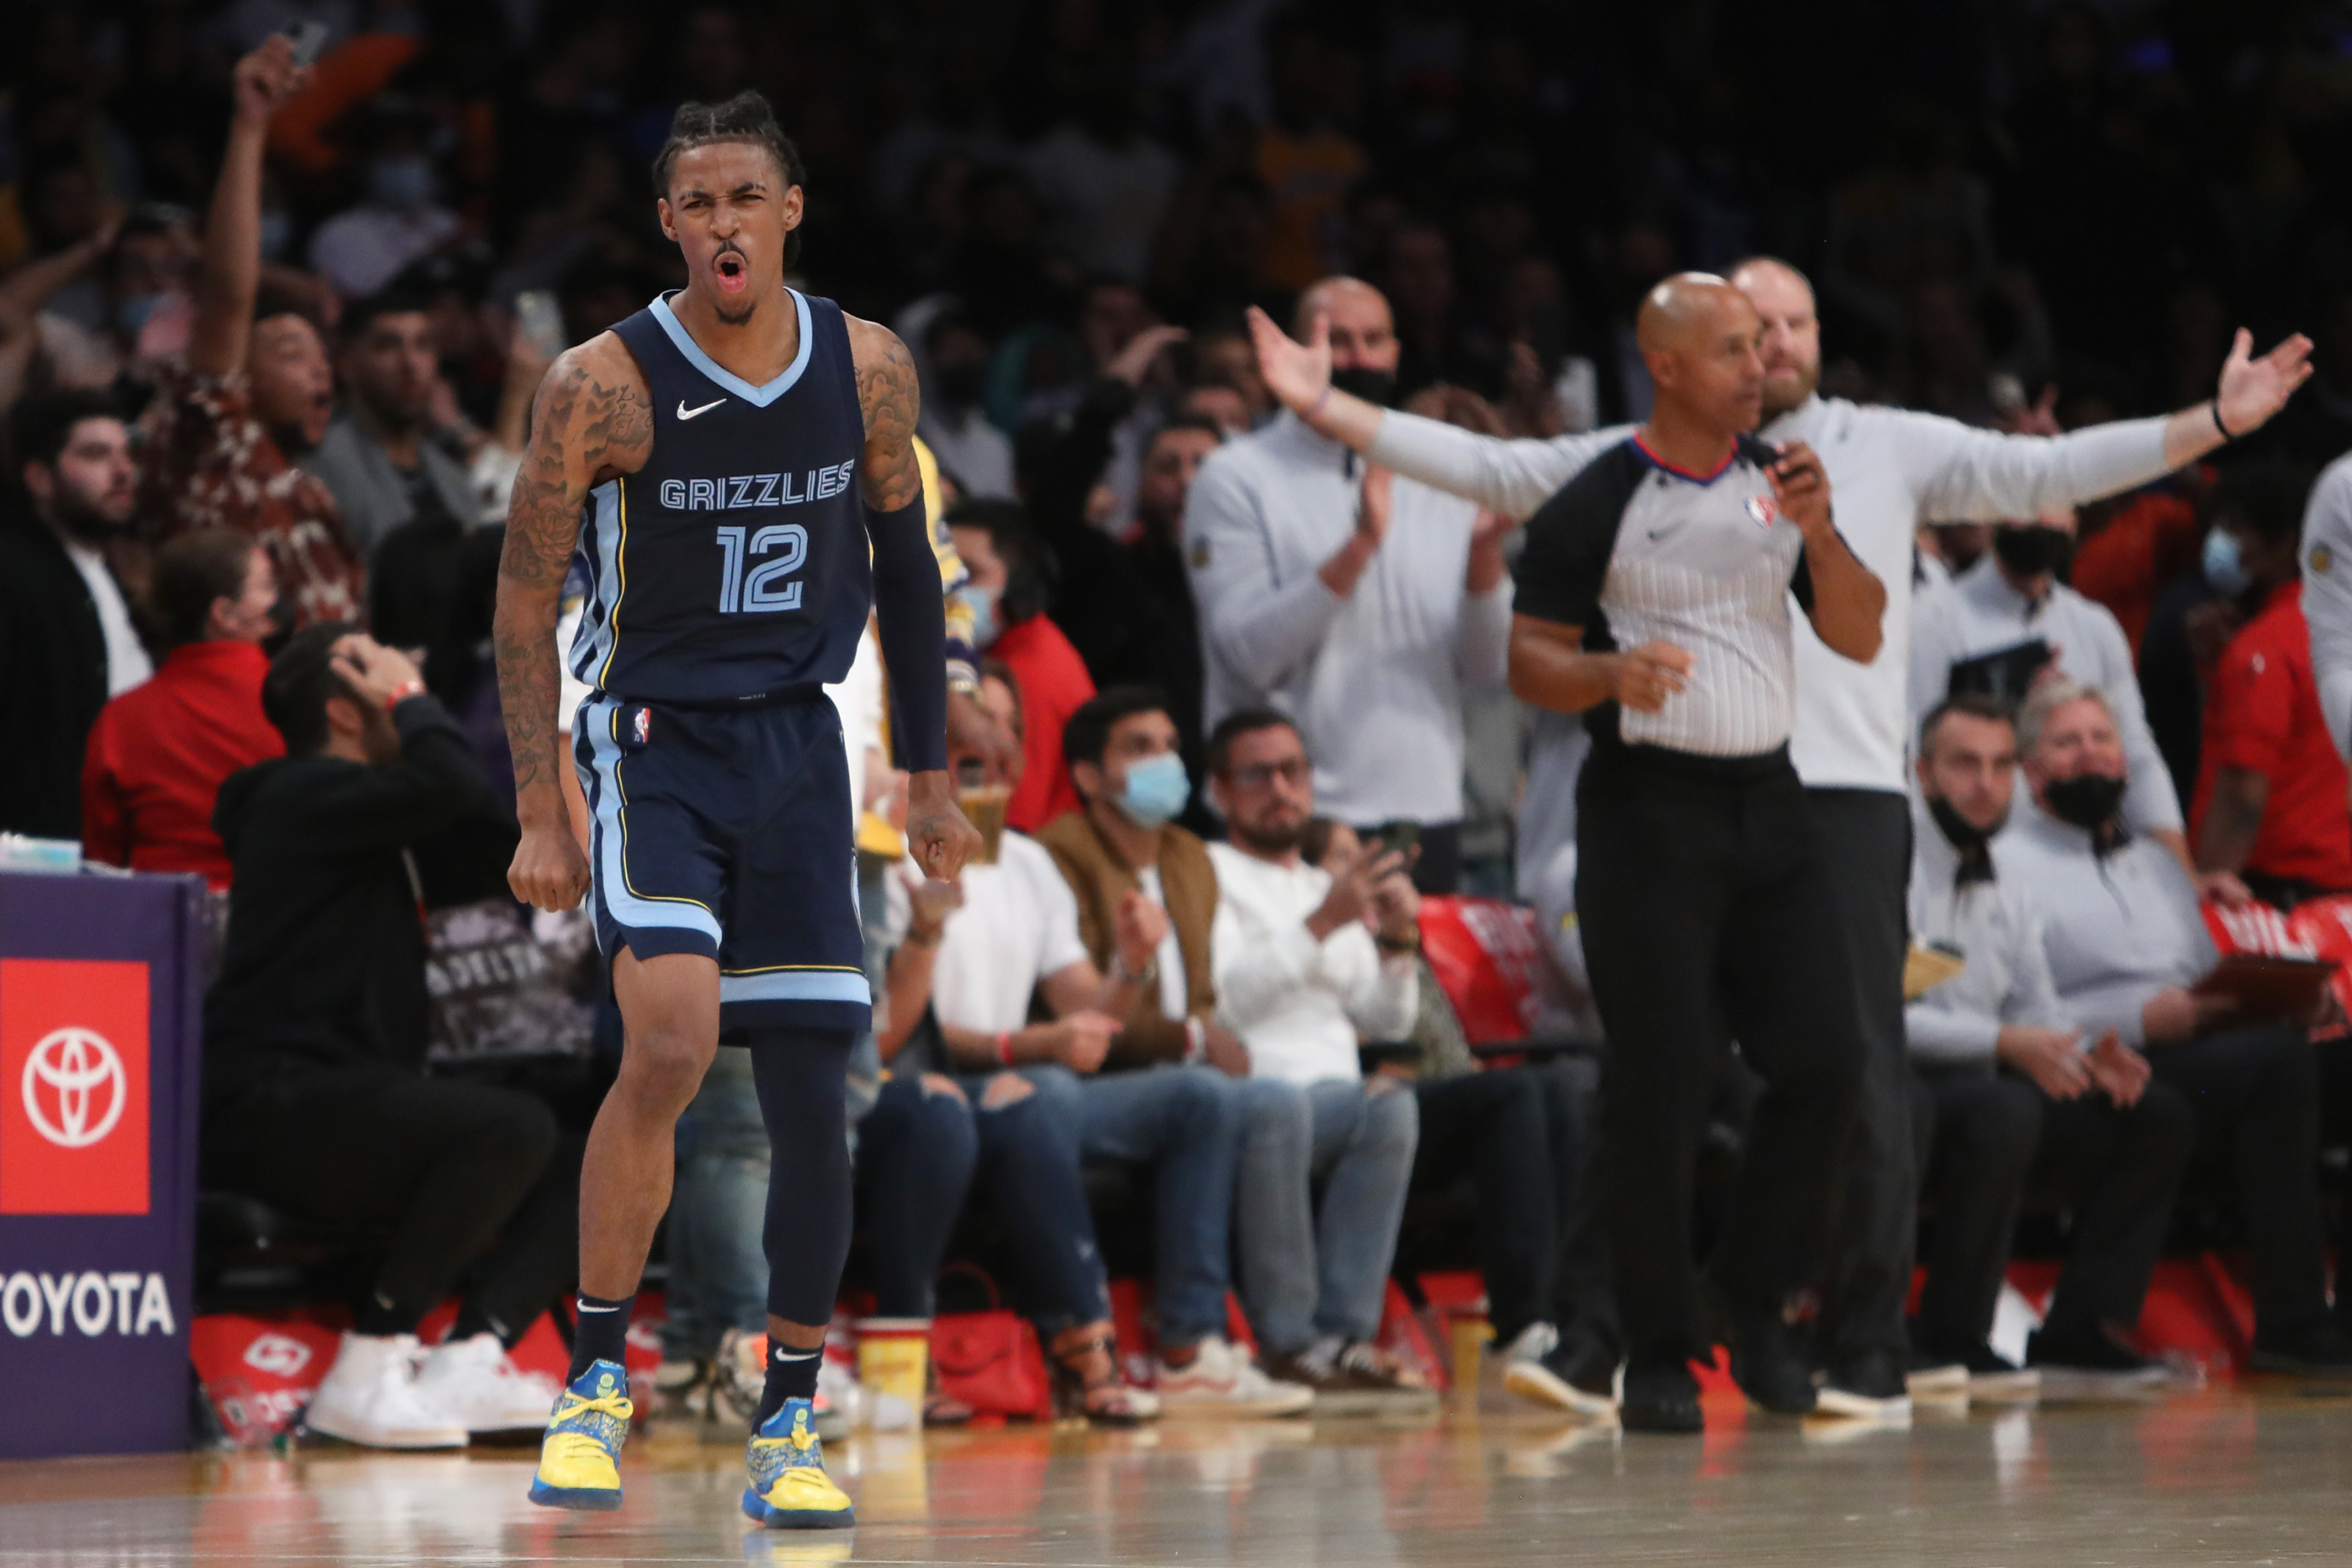 Grizzlies: Ja Morant snubbed from recent B/R rankings